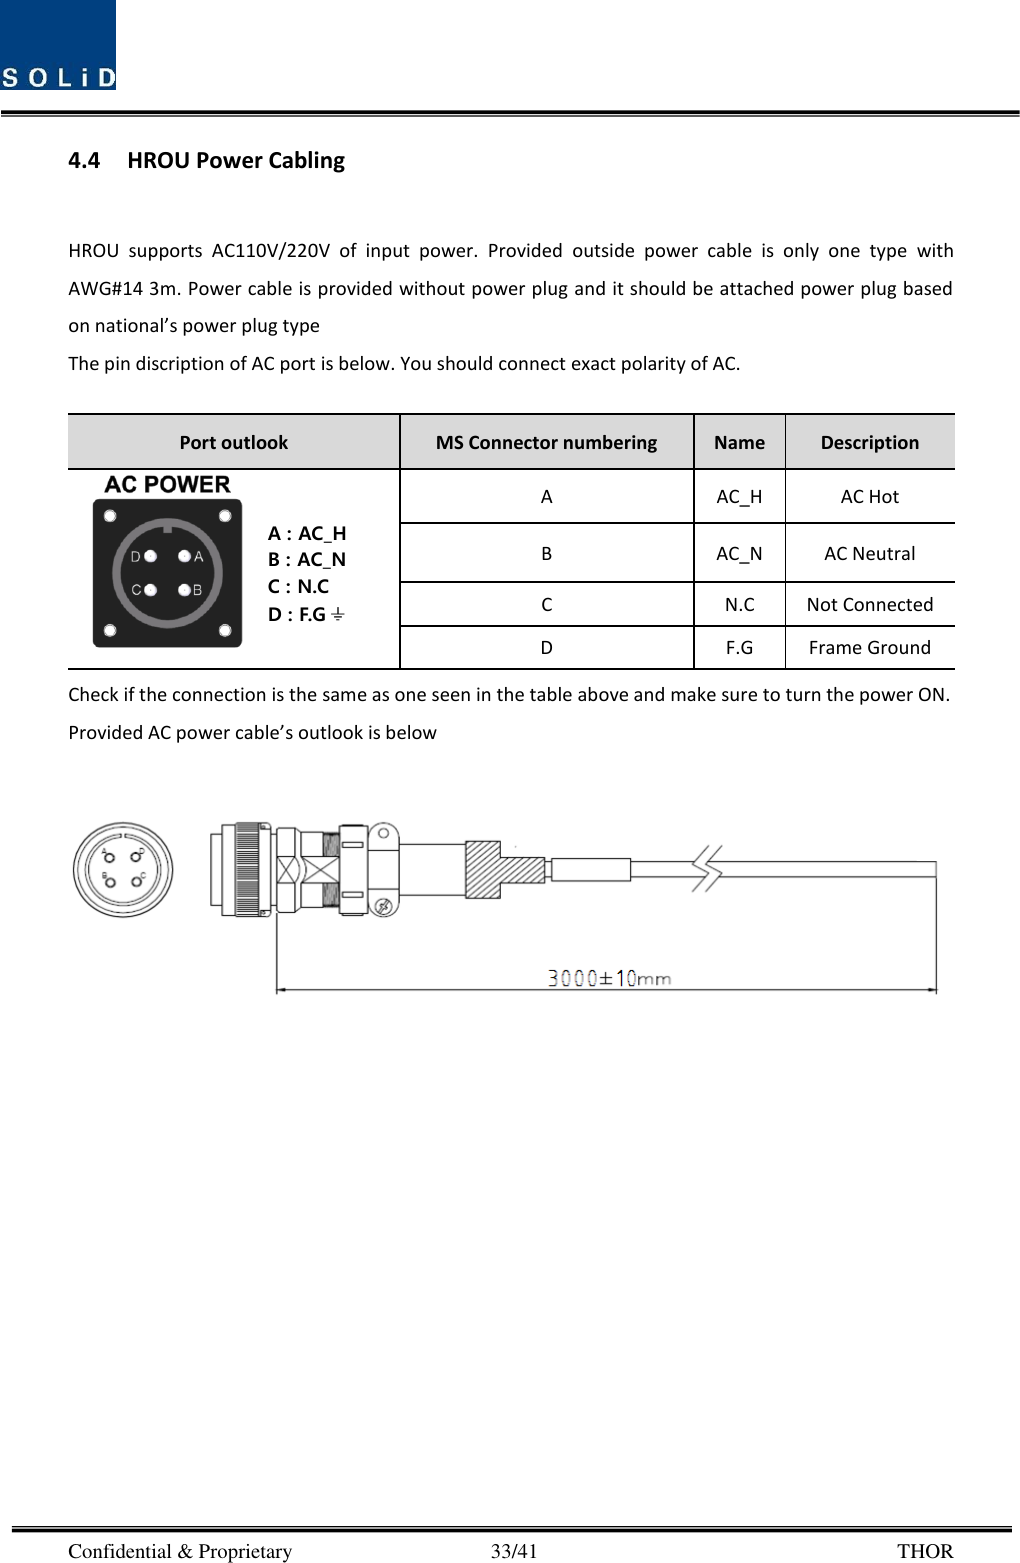  Confidential &amp; Proprietary                                      33/41       THOR 4.4 HROU Power Cabling  HROU  supports  AC110V/220V  of  input  power.  Provided  outside  power  cable  is  only  one  type  with AWG#14 3m. Power cable is provided without power plug and it should be attached power plug based on national’s power plug type The pin discription of AC port is below. You should connect exact polarity of AC.  Port outlook MS Connector numbering Name Description  A AC_H AC Hot B AC_N AC Neutral C N.C Not Connected D F.G Frame Ground Check if the connection is the same as one seen in the table above and make sure to turn the power ON. Provided AC power cable’s outlook is below      A : AC_HB : AC_NC : N.CD : F.G